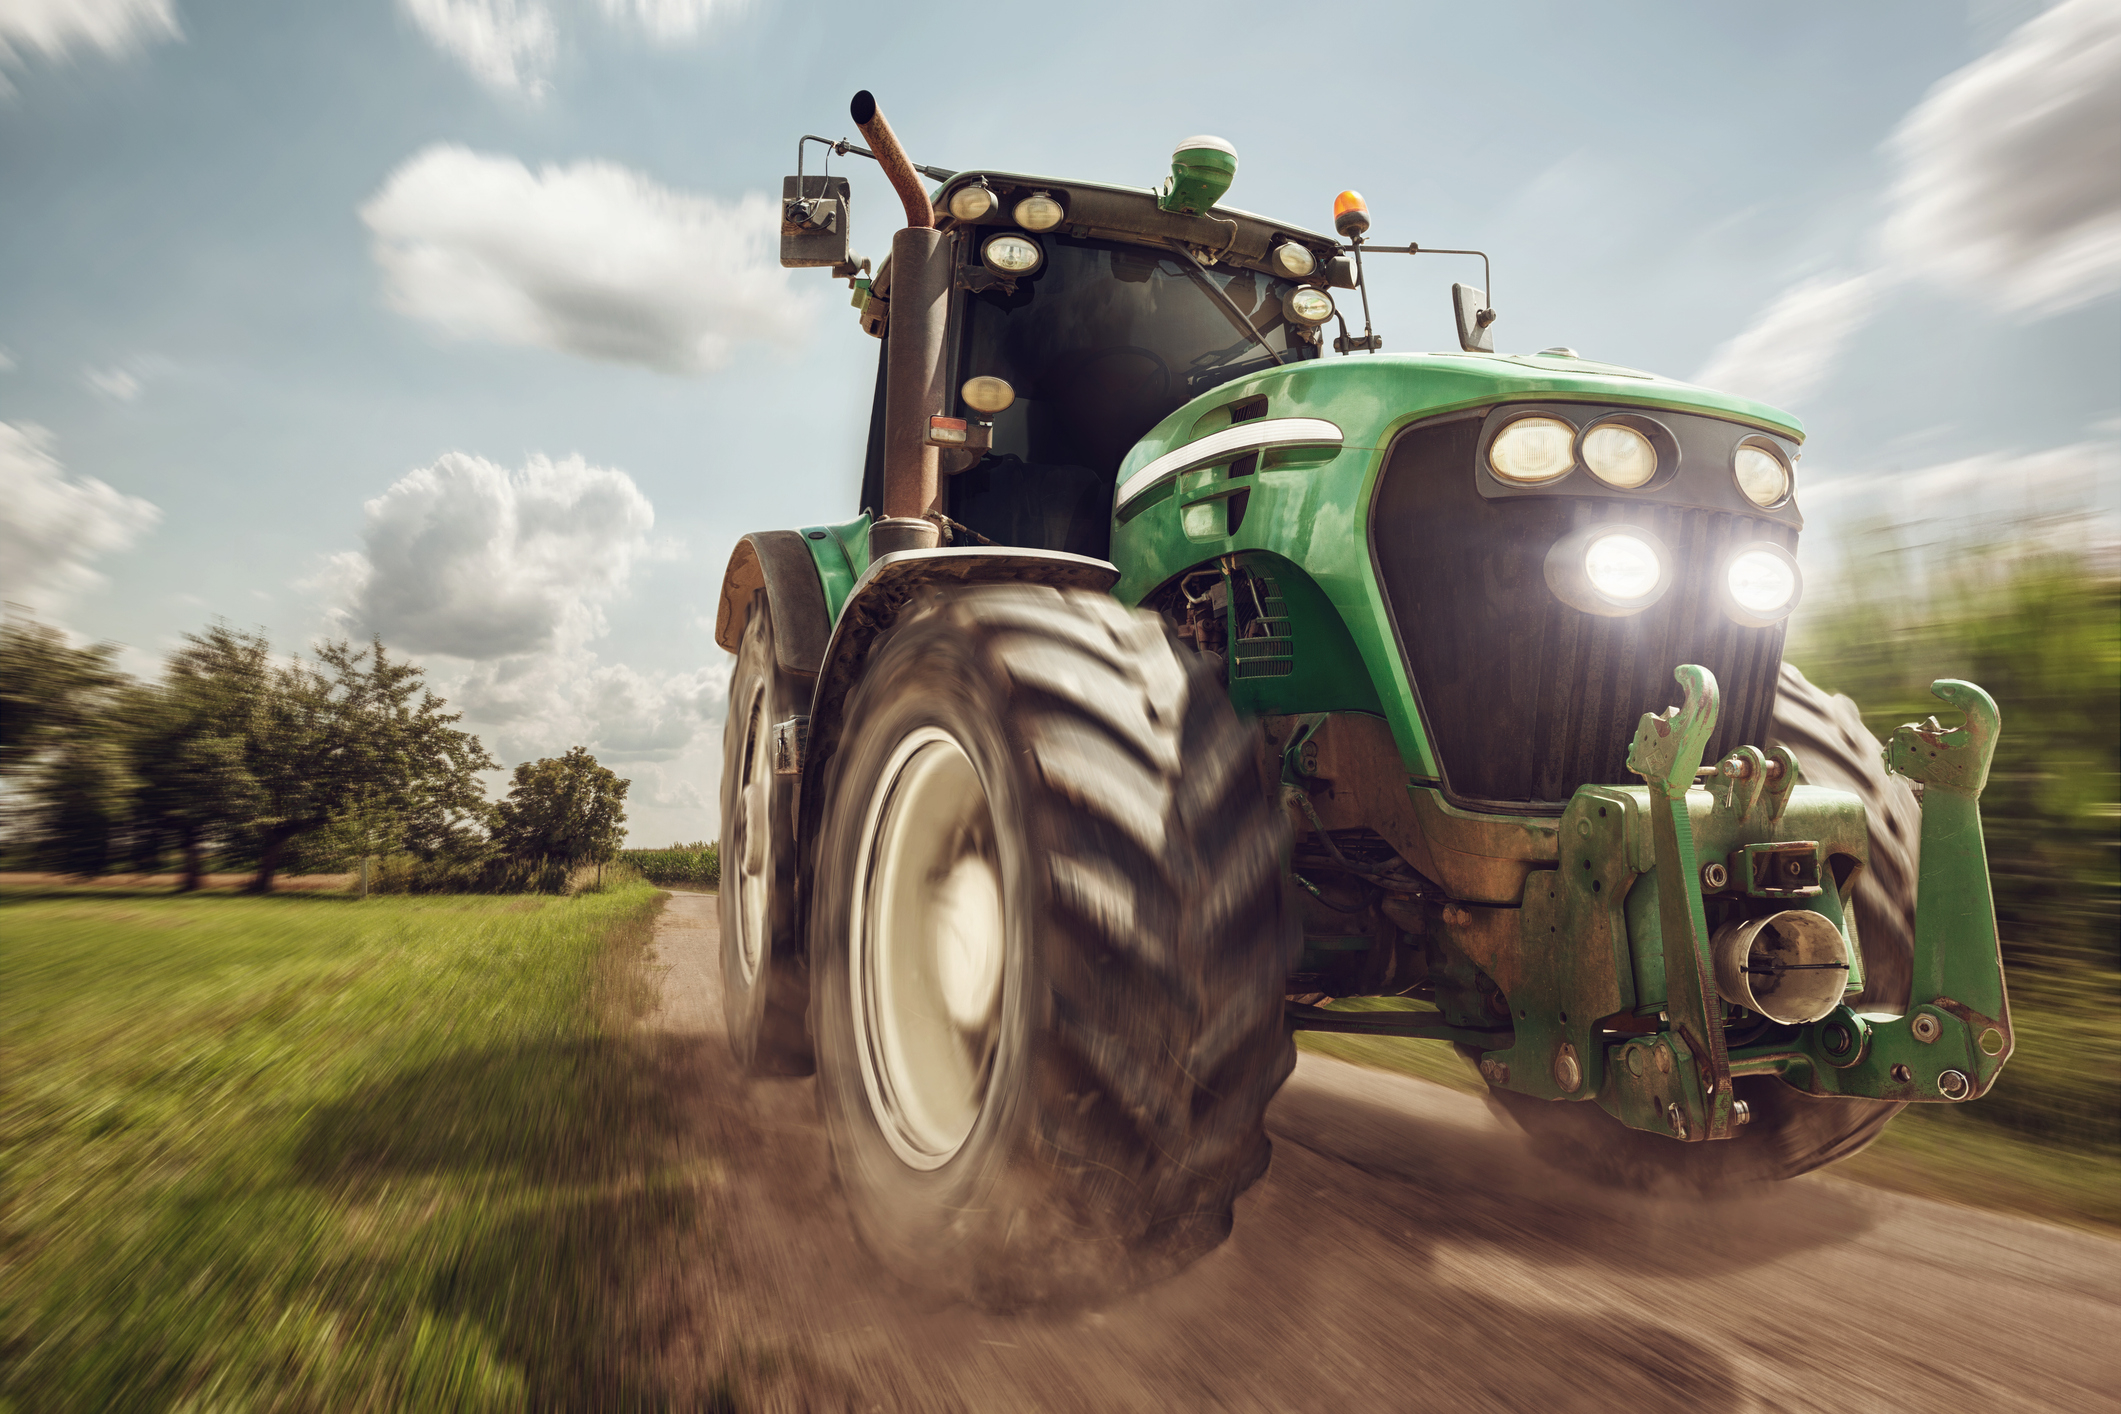 A green tractor drives down a rural dirt road with grassy fields and trees in the background under a partly cloudy sky